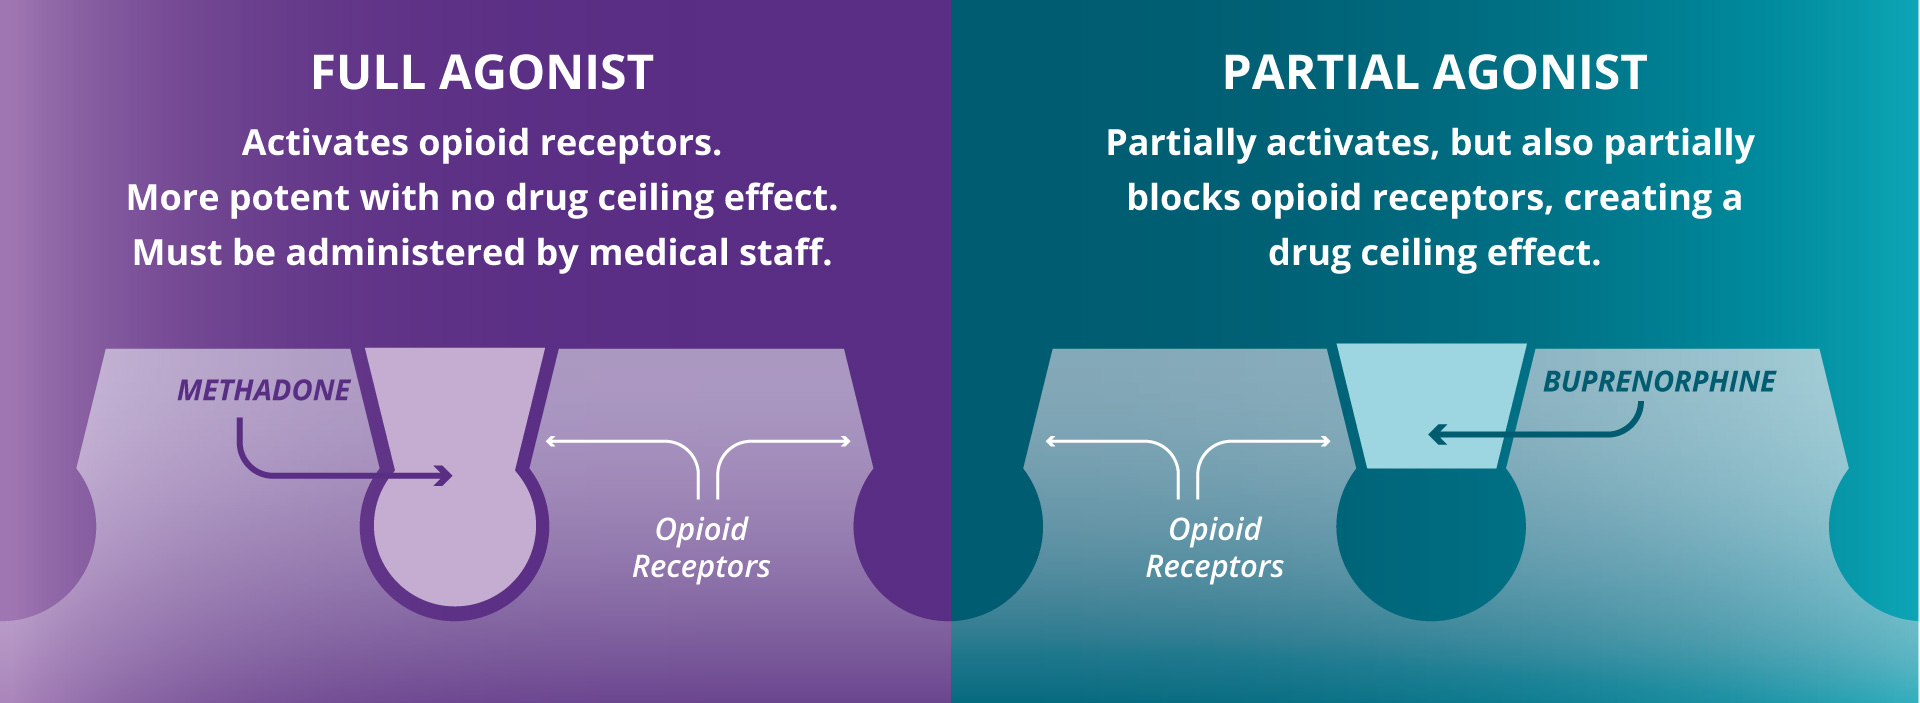 Infographic-Partial-vs-Full-Agonist